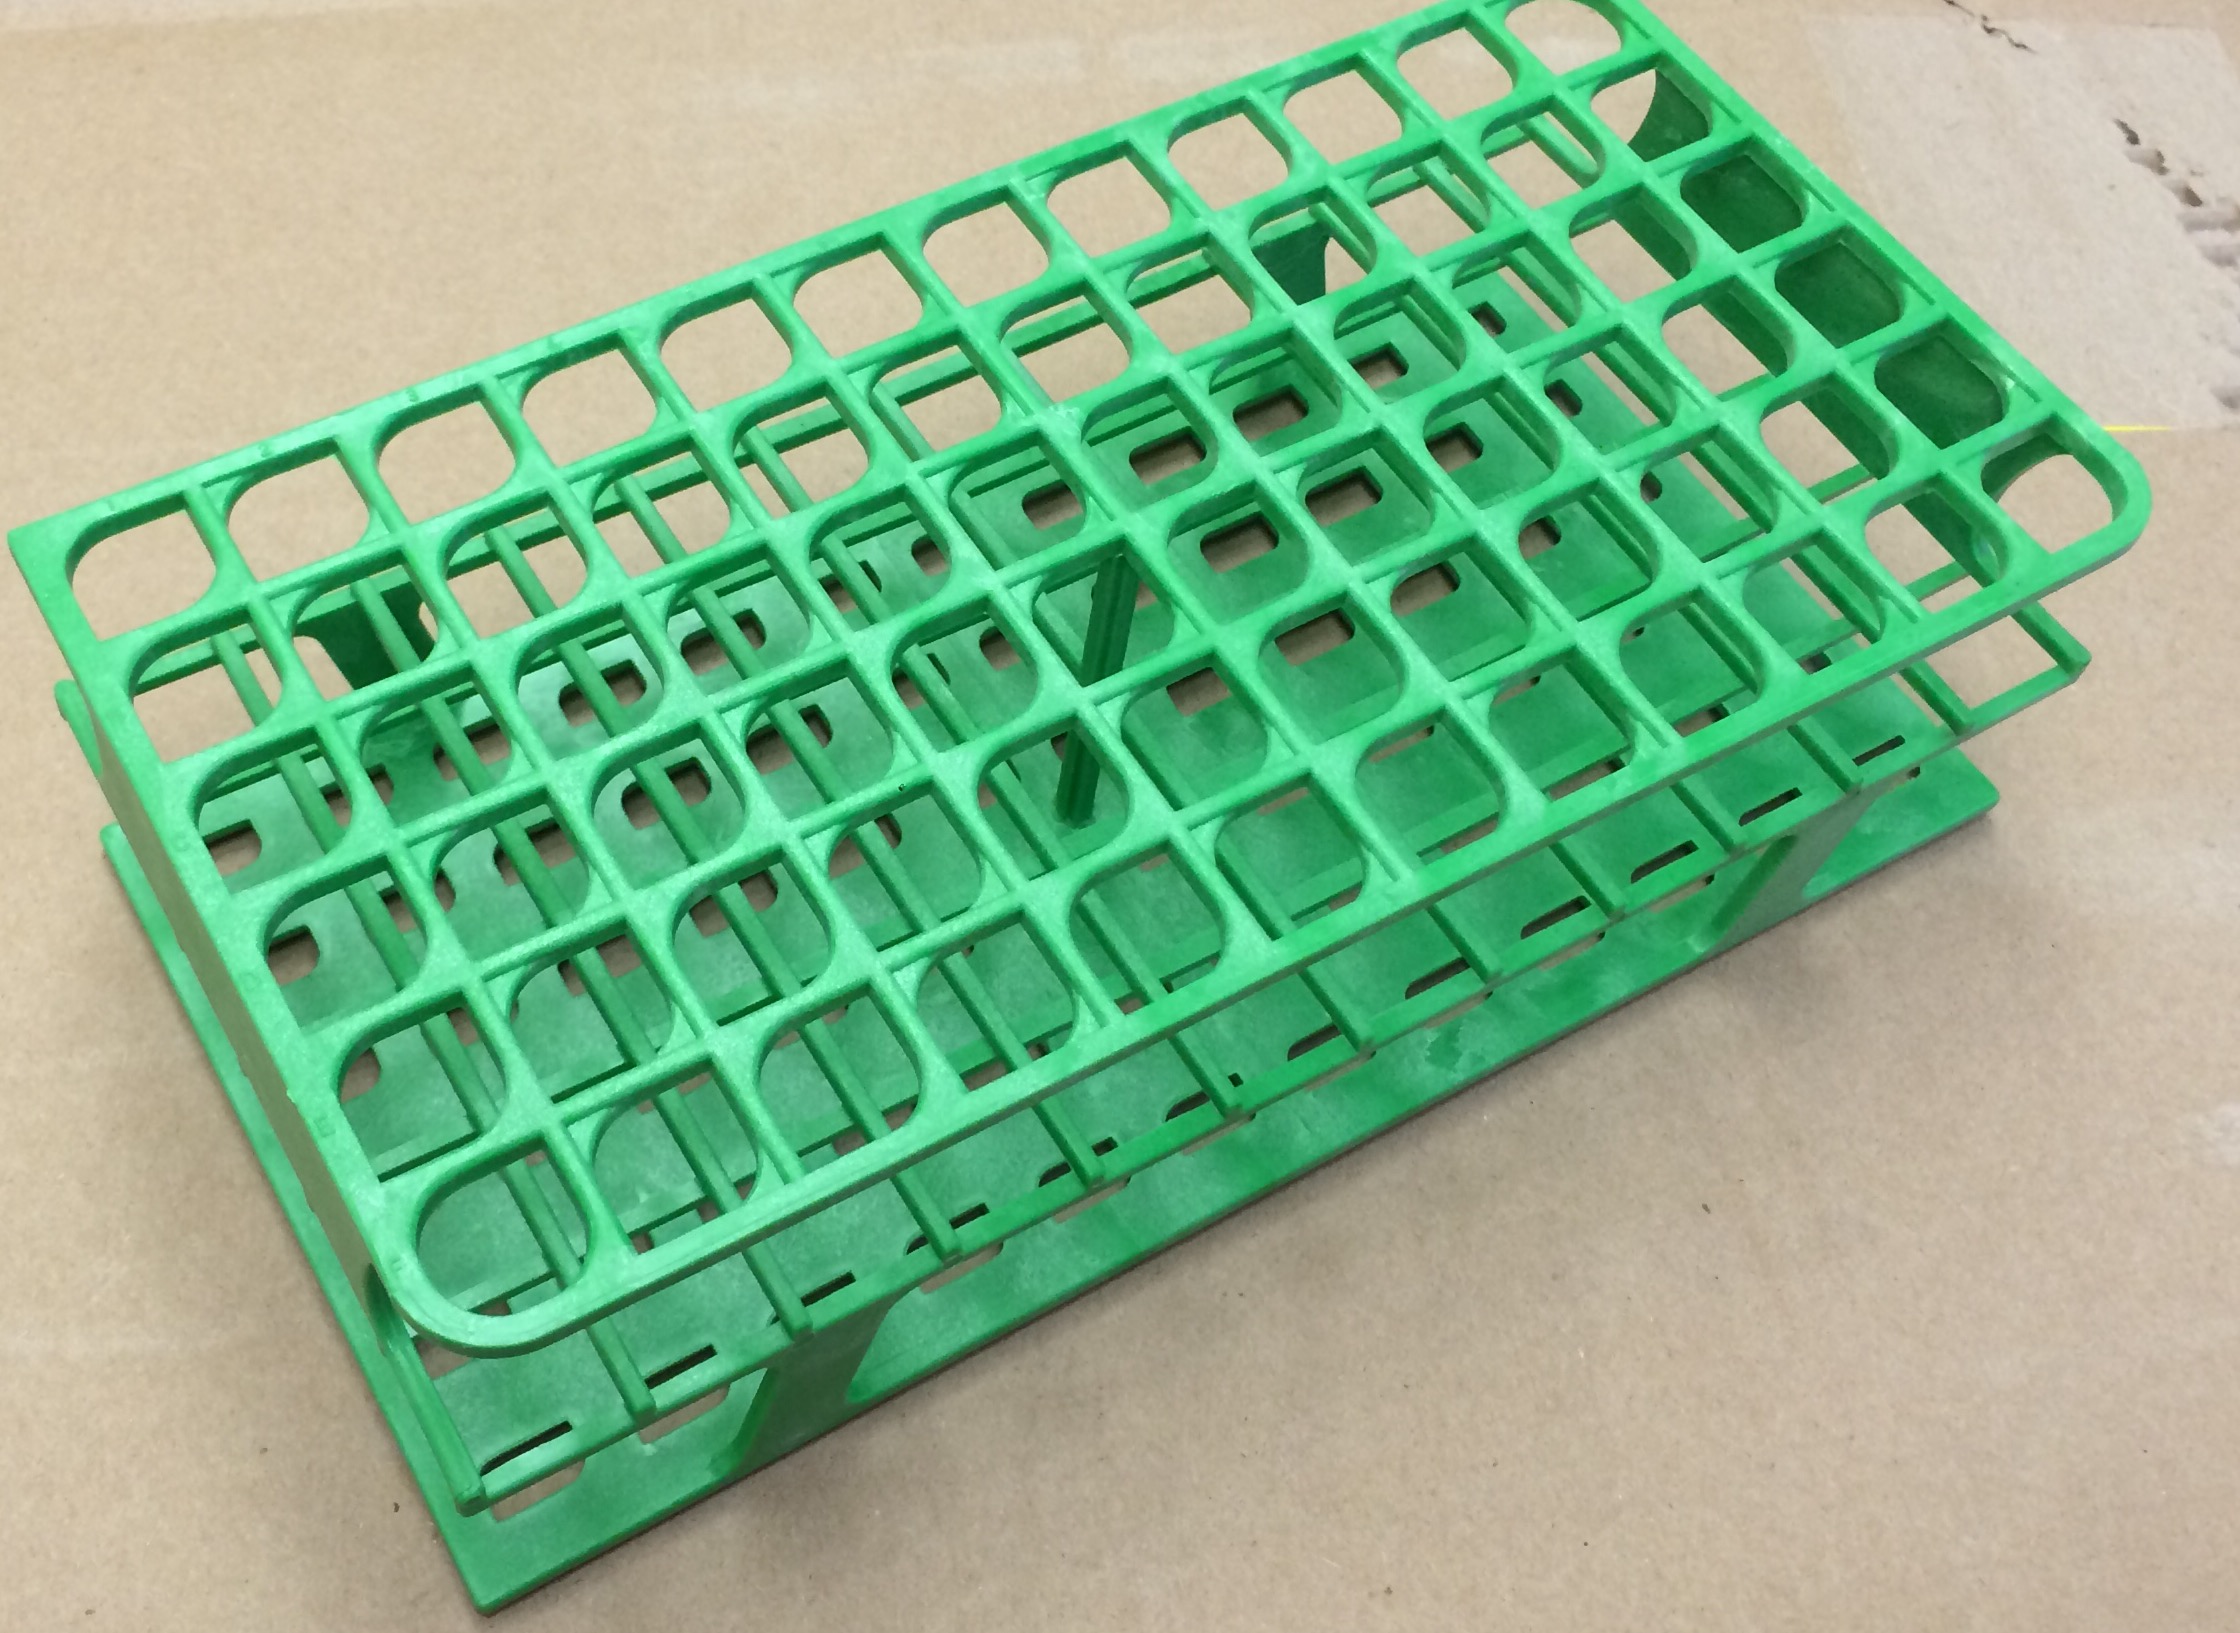 Test Tube Rack Autoclavable 16mm 72 Hole<p><a href="images/green.pngtitle="In Stock & Ready for immediate shipping."></a><img src="images/green.png" alt="In Stock & Ready for immediate shipping." title="In Stock & Ready for immediate shipping." width="227" height="50" /></p>